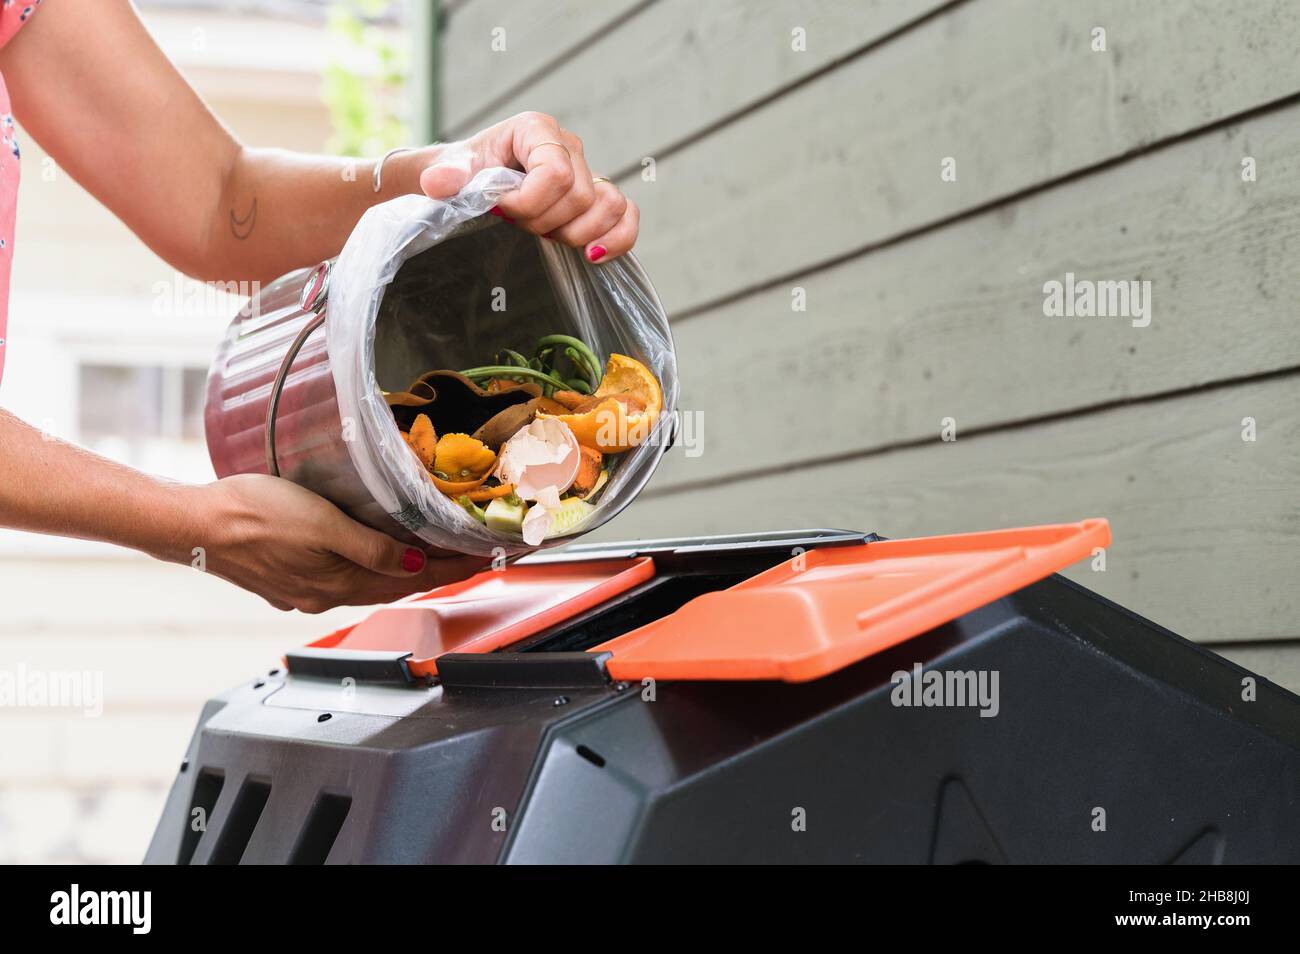 Close-up of woman putting kitchen scraps into compost bin Stock Photo